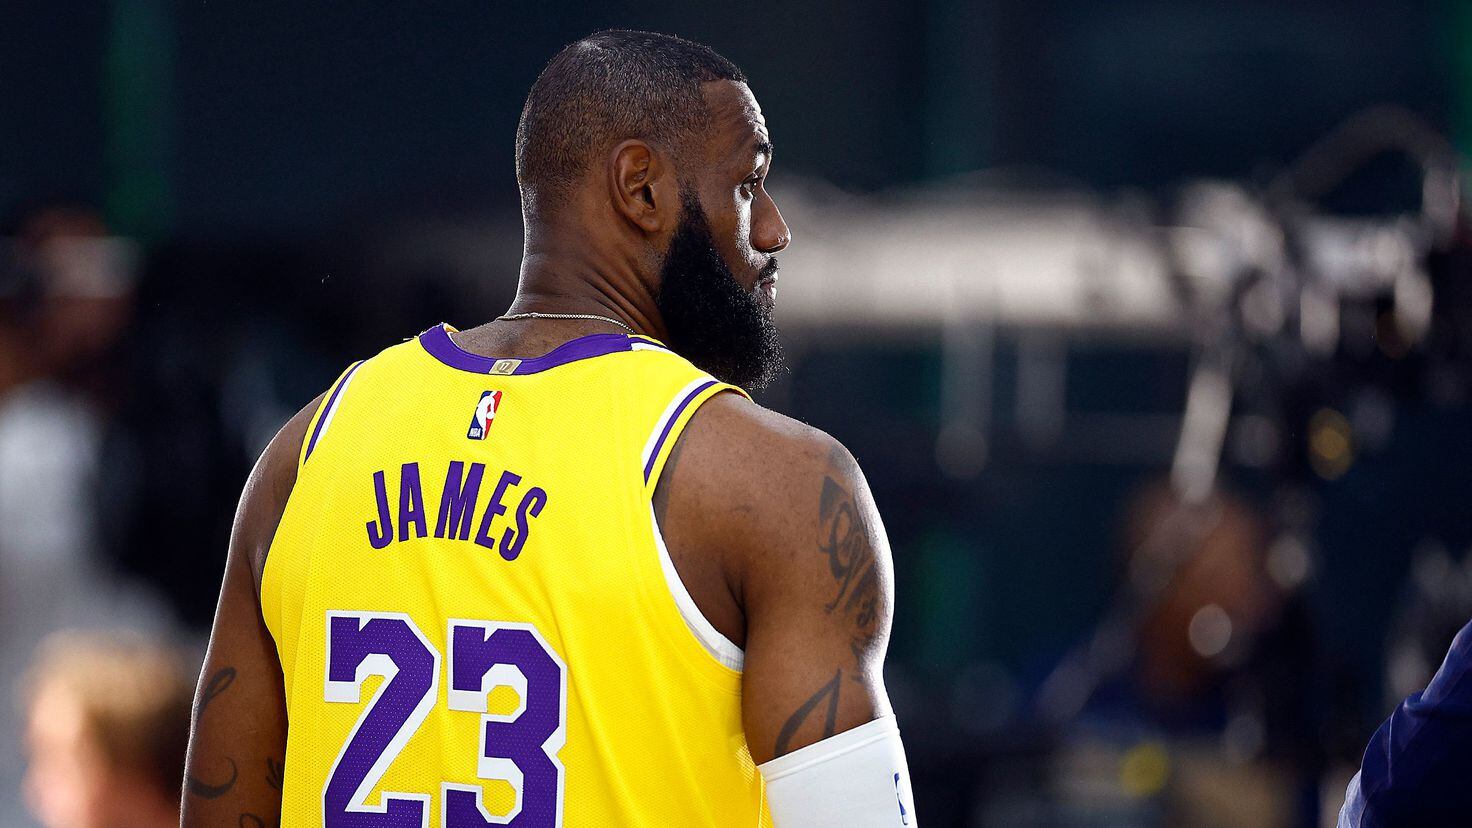 NBA star James returns to jersey No. 23 in Russell tribute